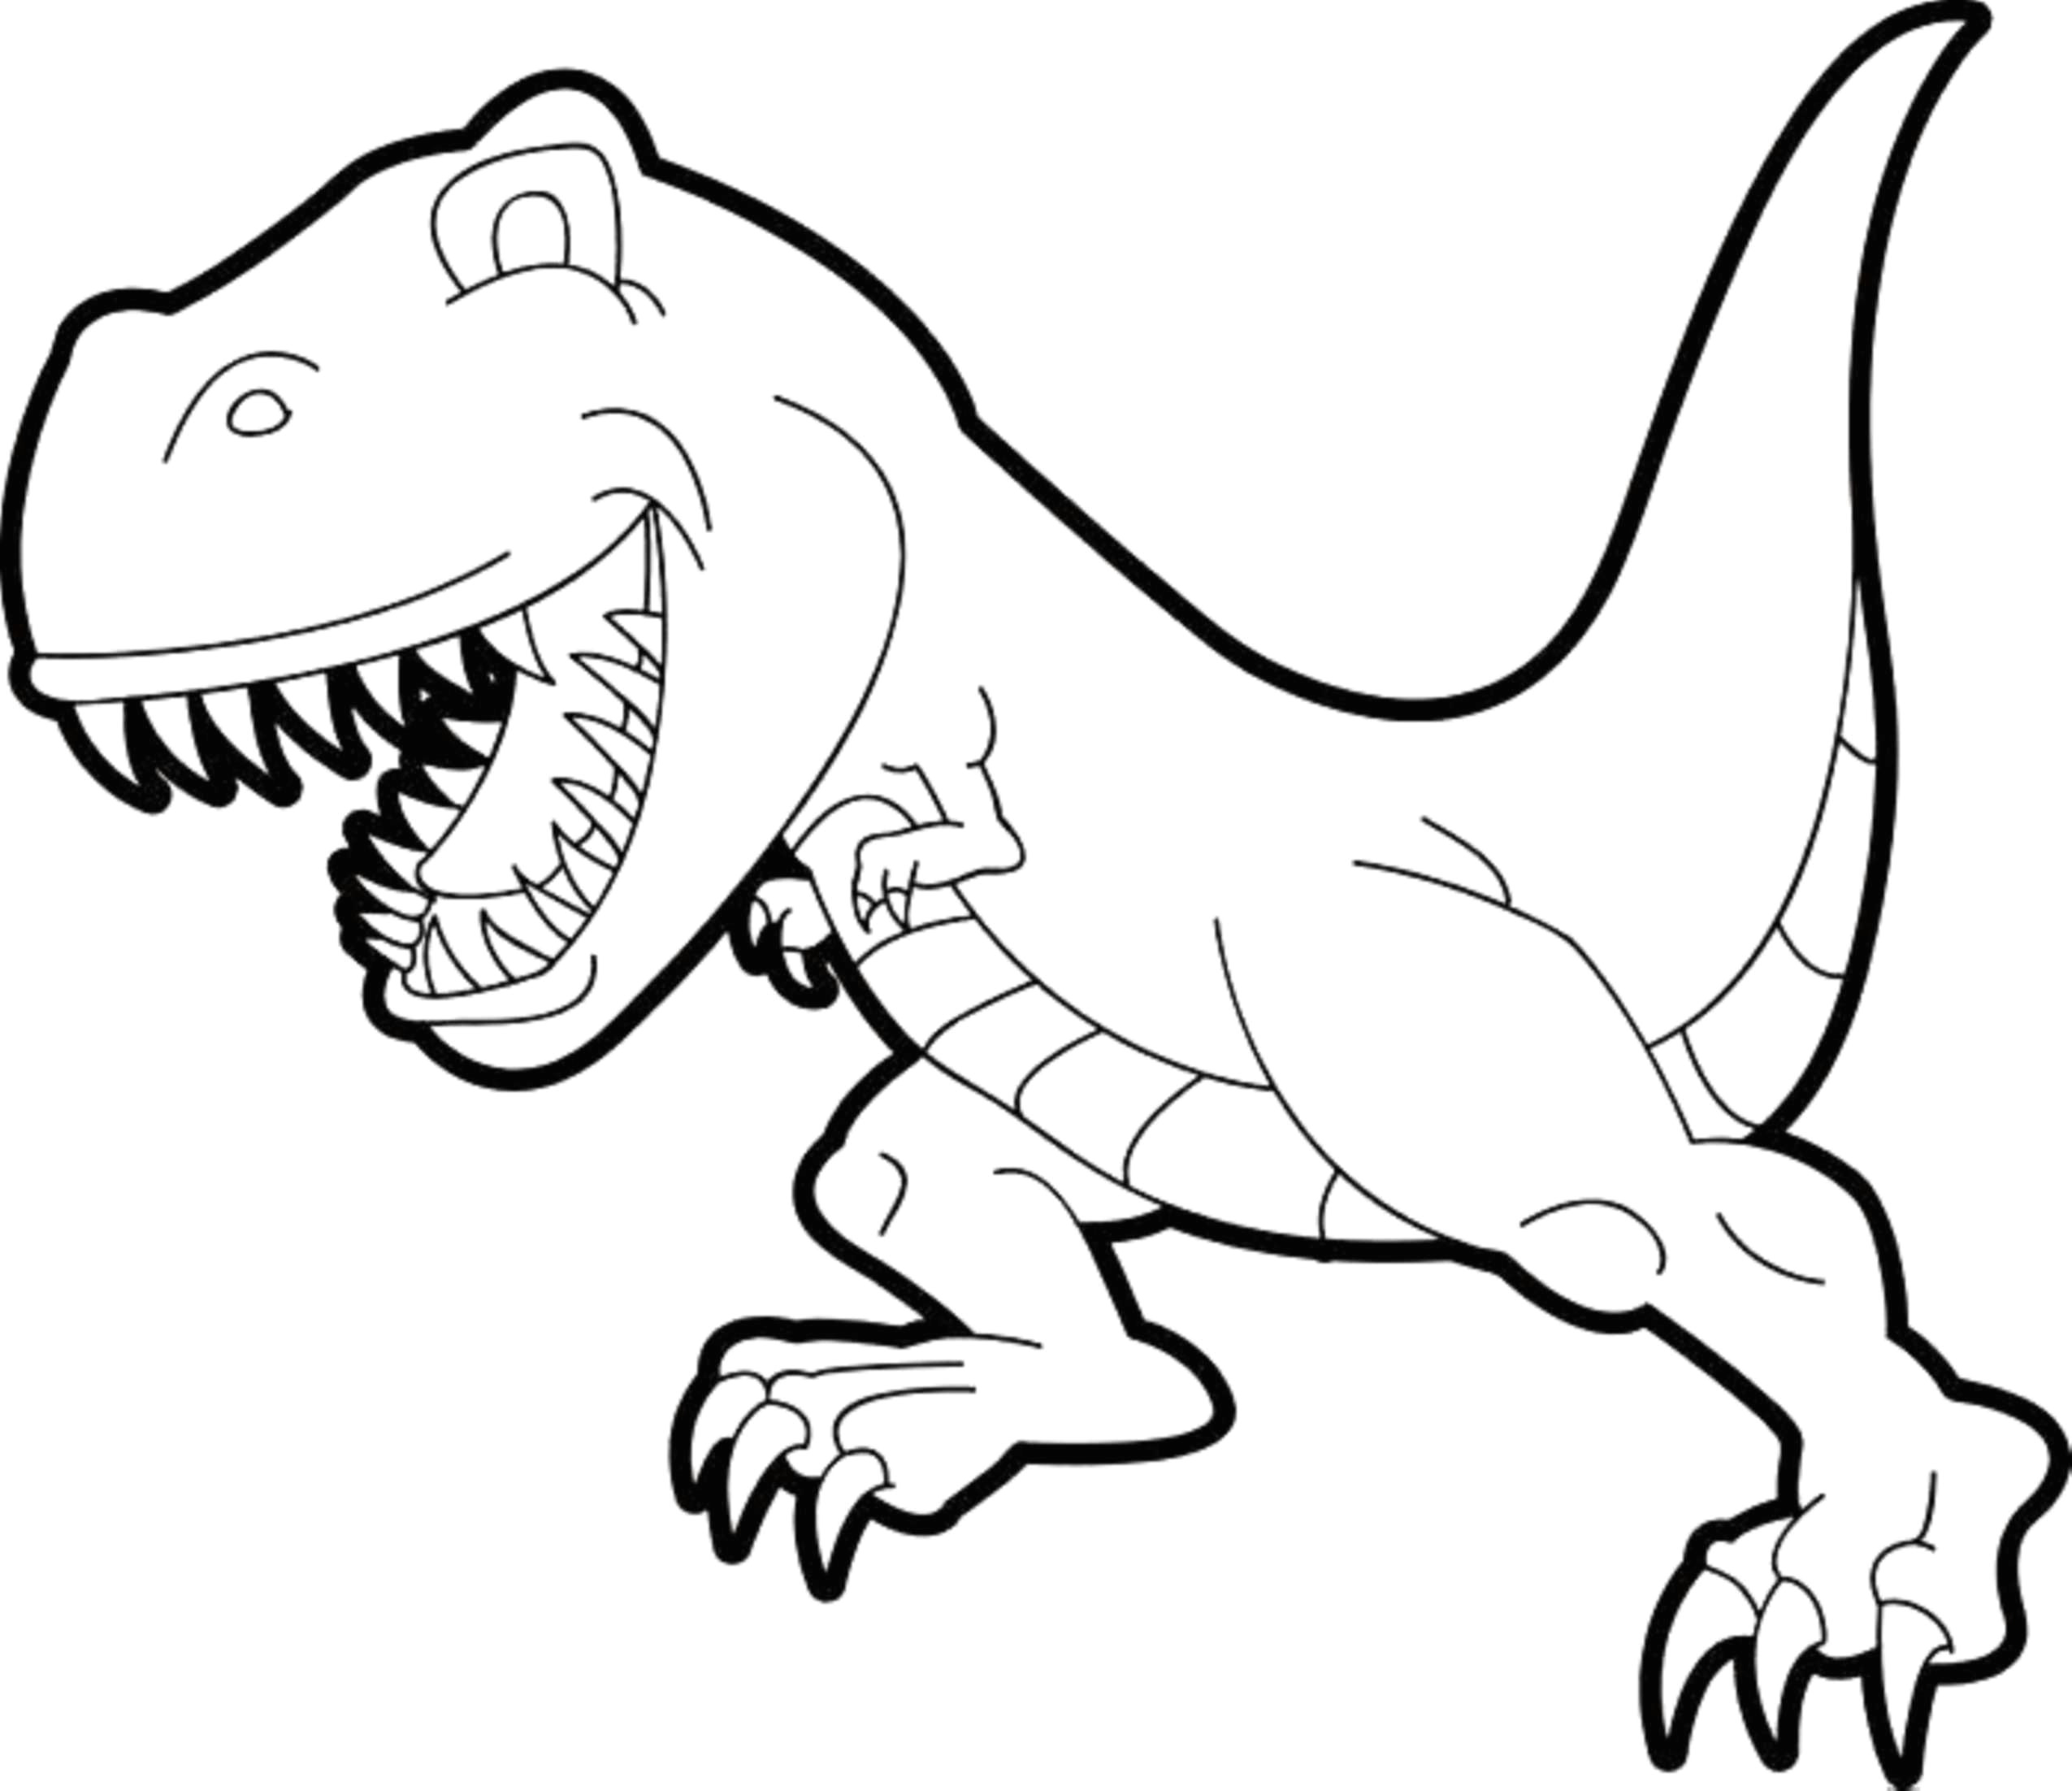 download lovely jurassic world tyrannosaurus rex coloring pages with original resolution click here